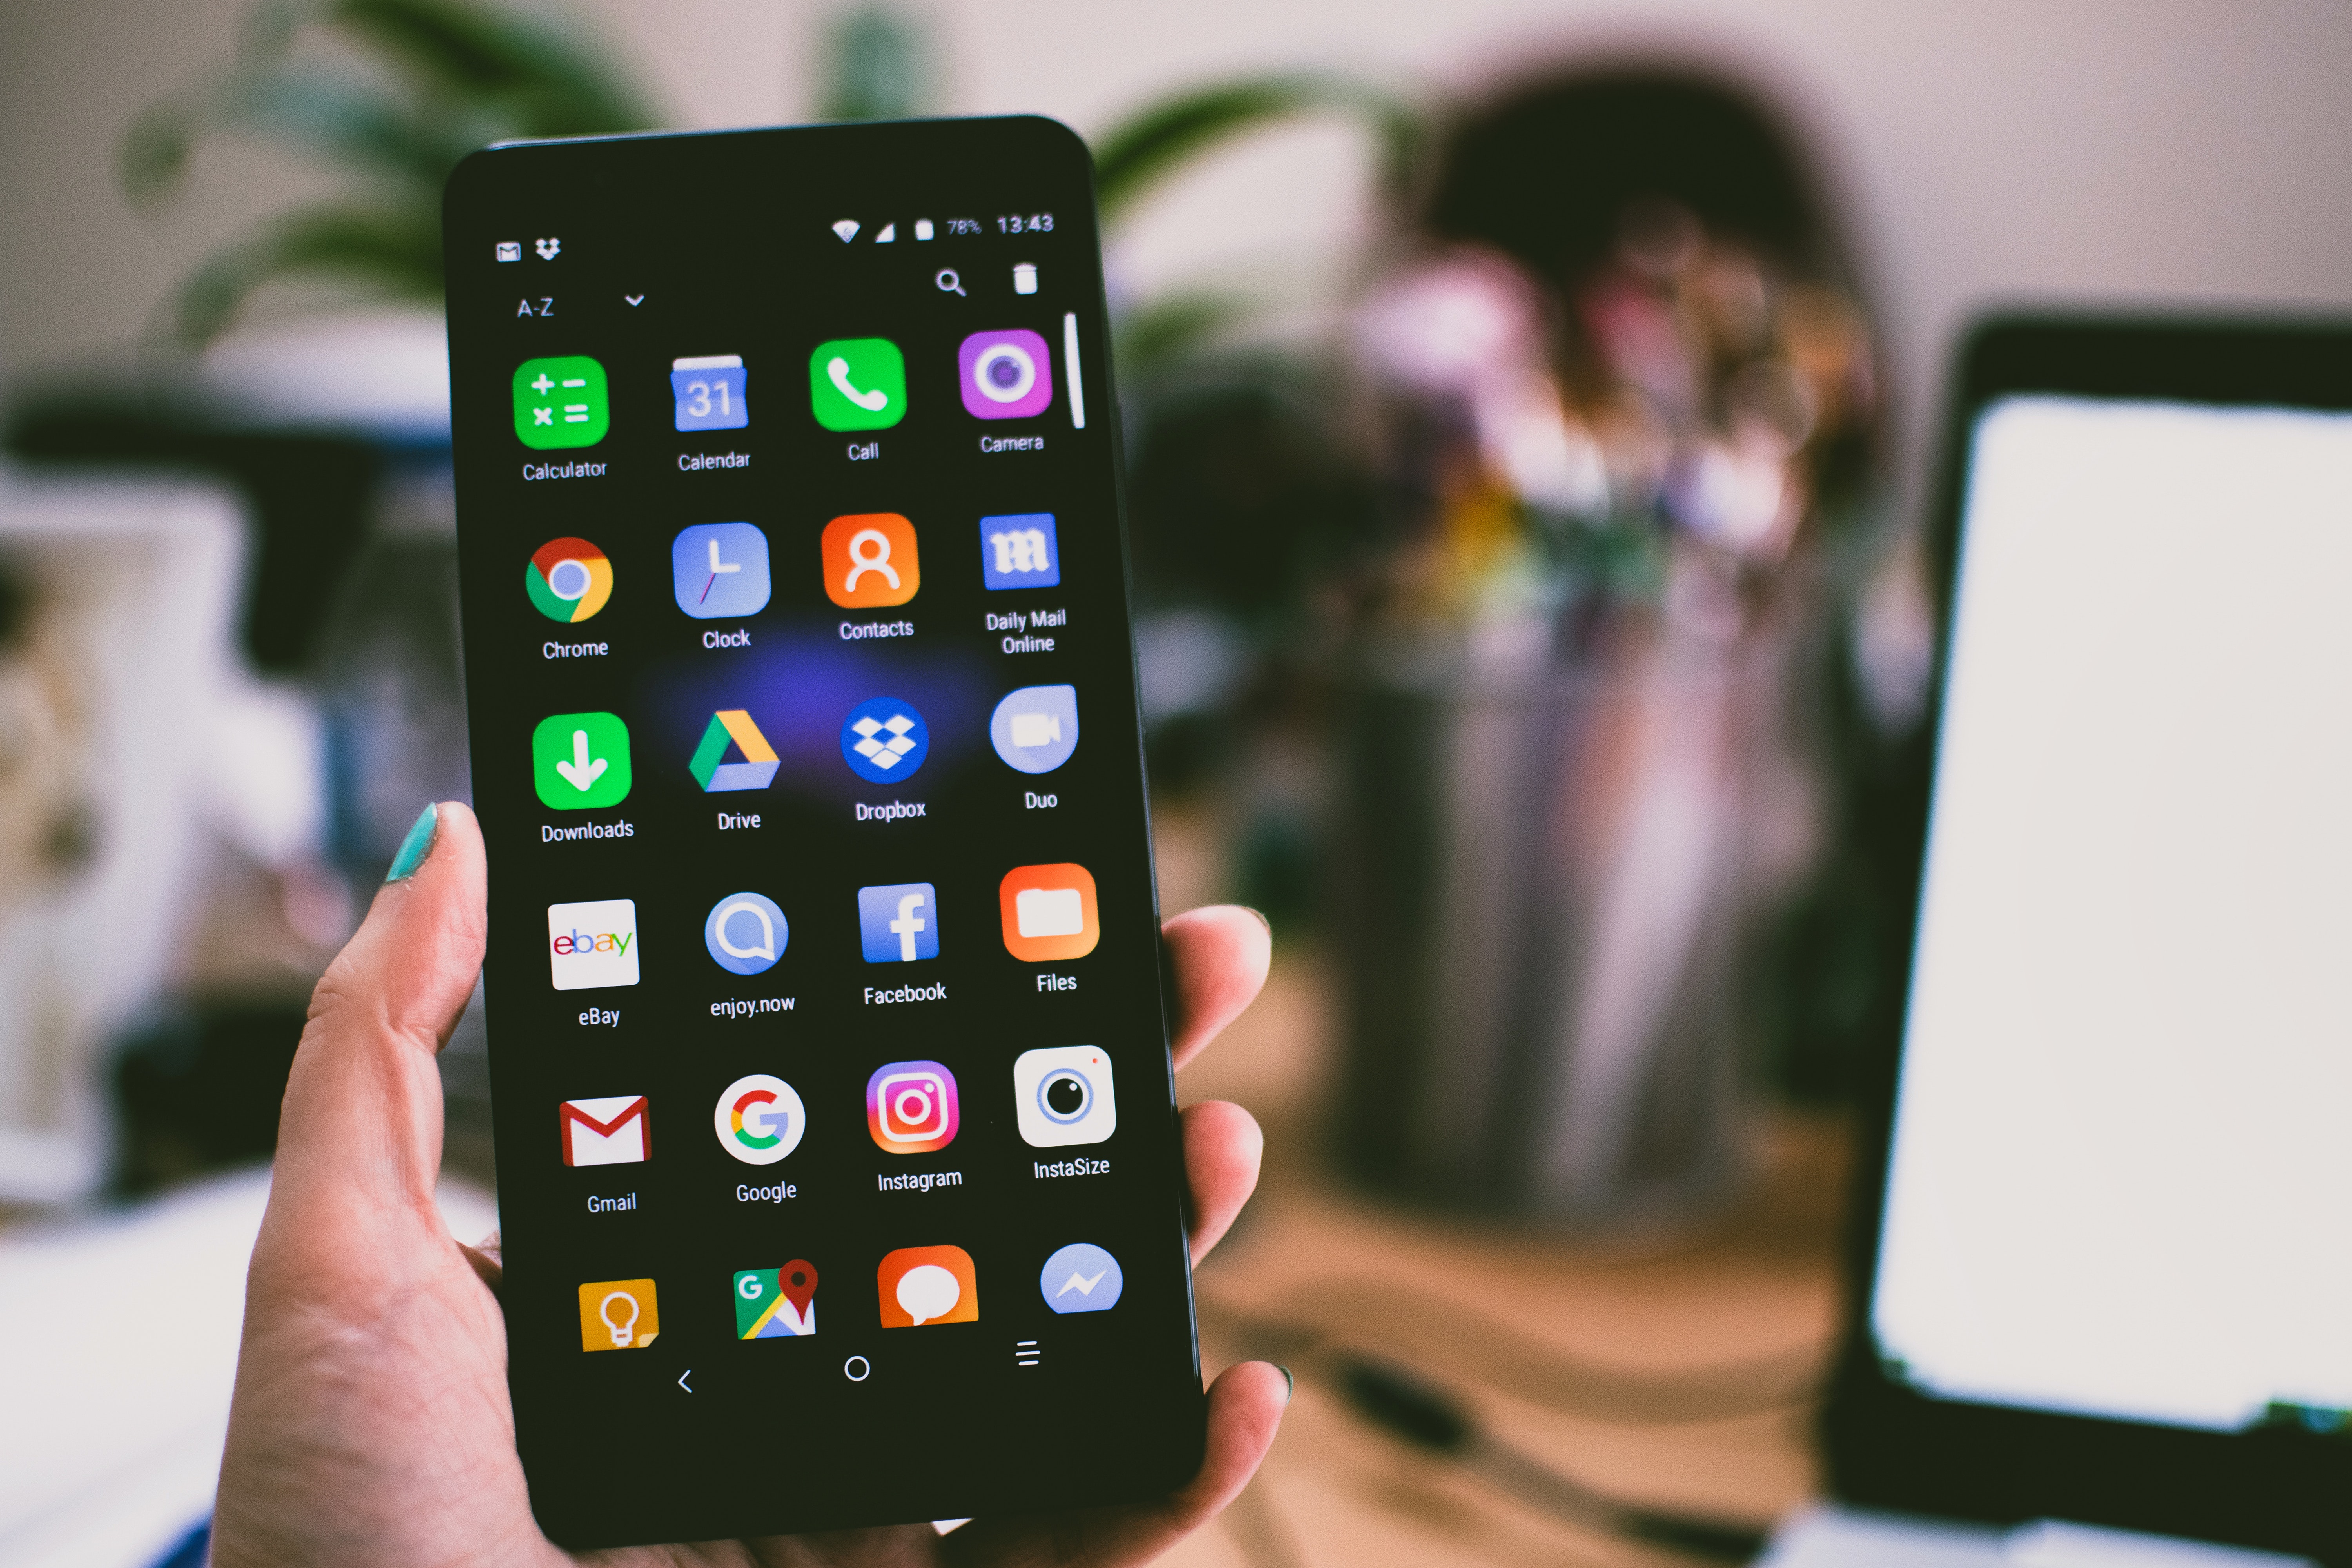 Android smartphone apps